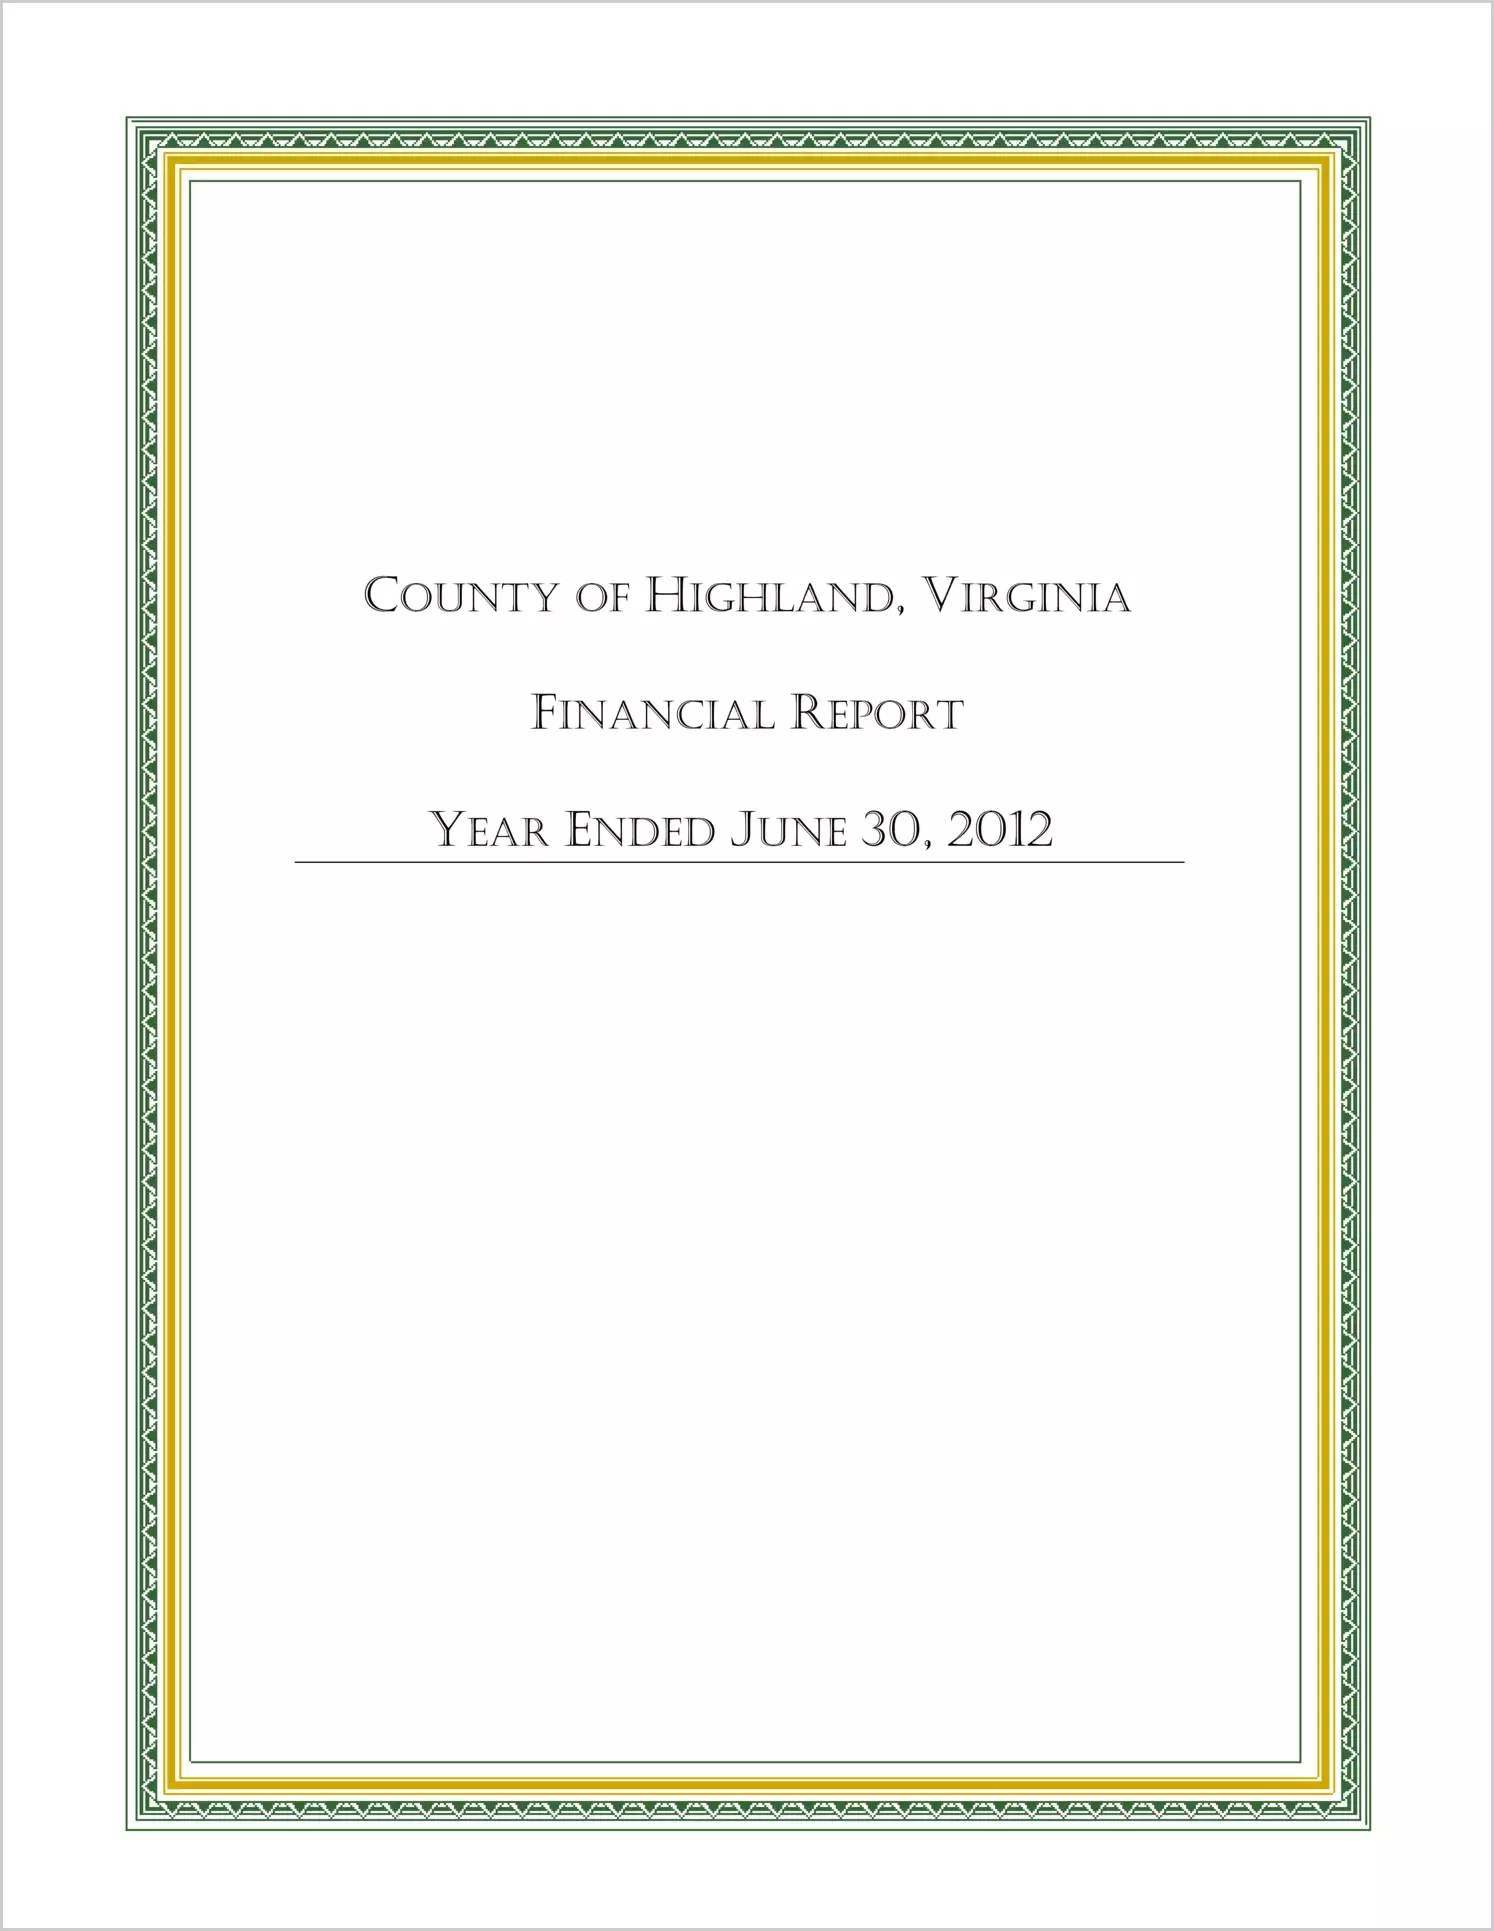 2012 Annual Financial Report for County of Highland